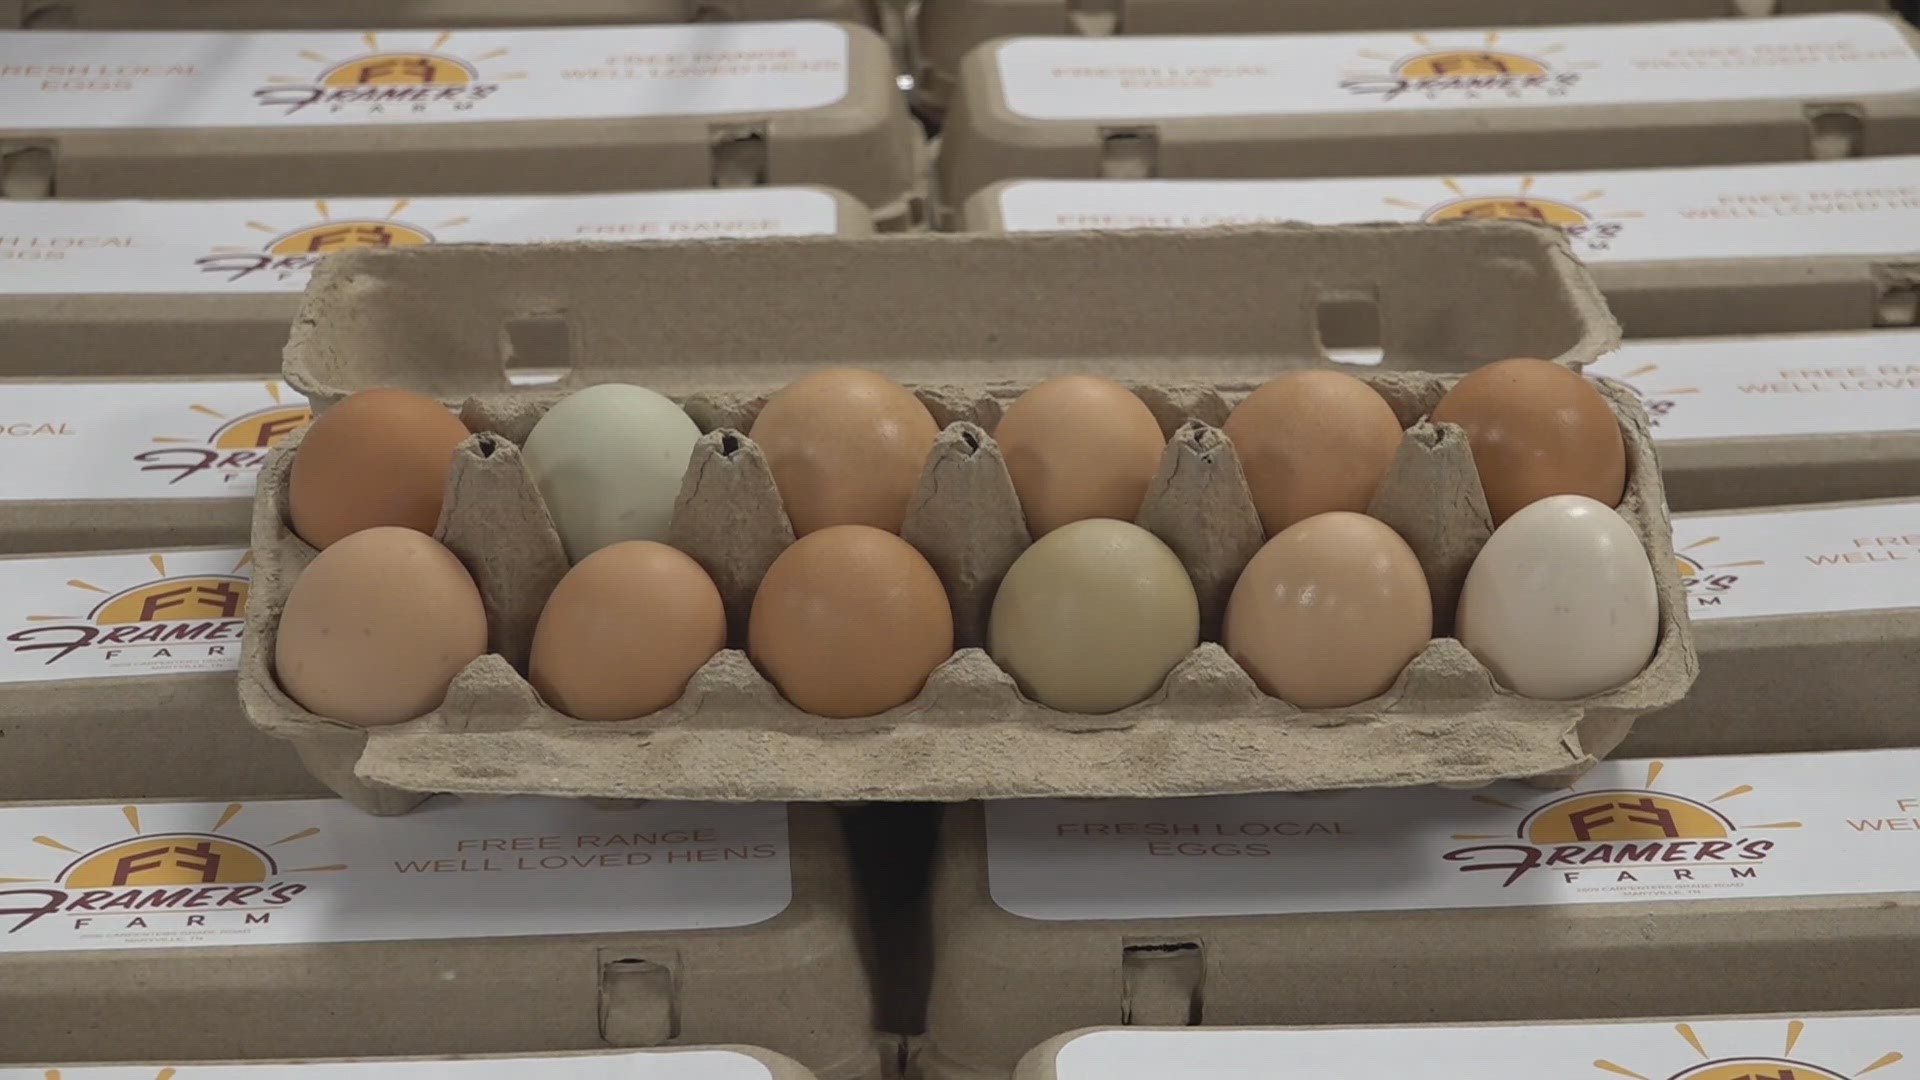 The donation comes as the bird flu, weather and inflation are keeping egg prices high.